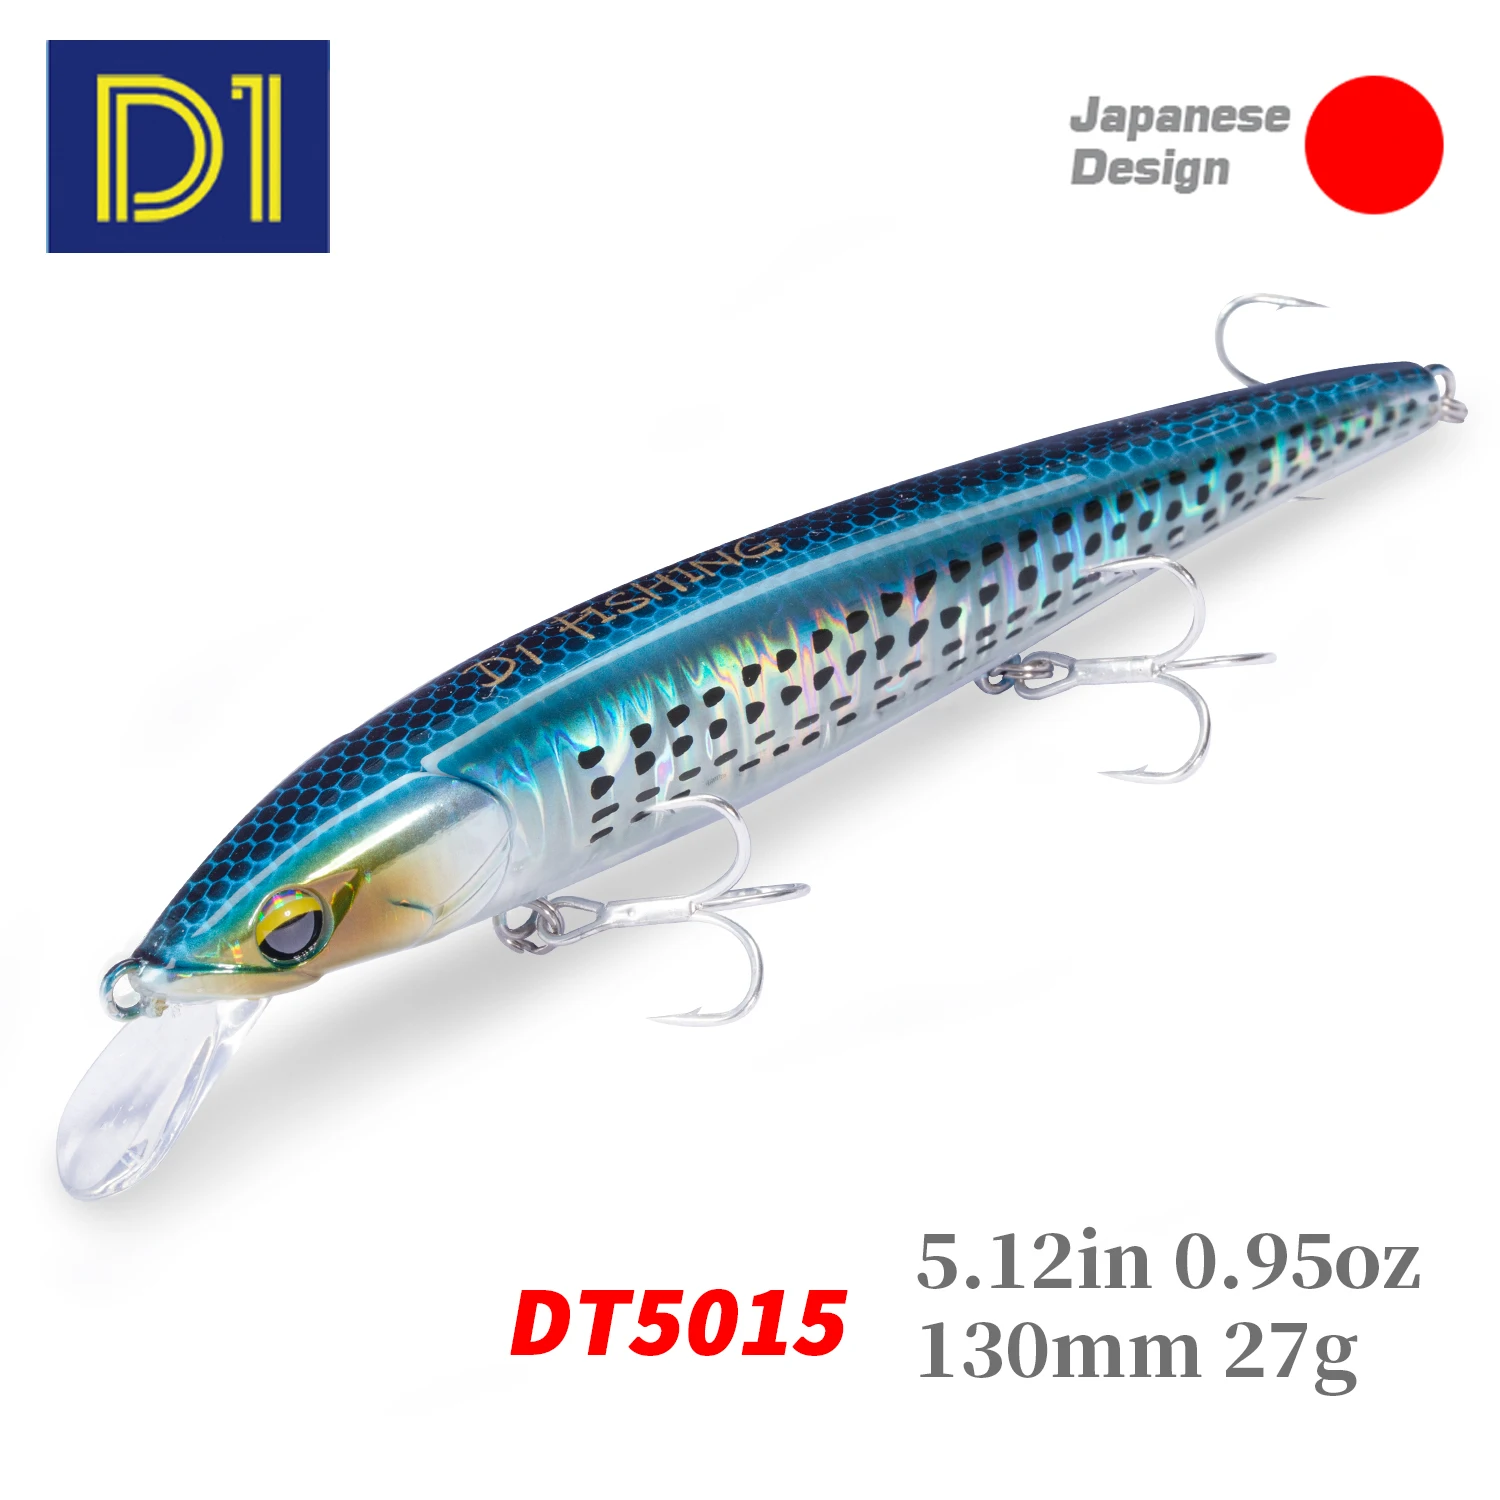 D1 Minnow Lures EJA 130 Sinking 27g Sea Fishing Hard Artificial Wobblers Depth 40-70cm Long Casting Jerkbait 2021 pescar Tackle d1 popper fishing lures 90mm 17g slow sinking jerkbait crankbait rolling wobblers minnow hard artificial bait bass pesca tackle